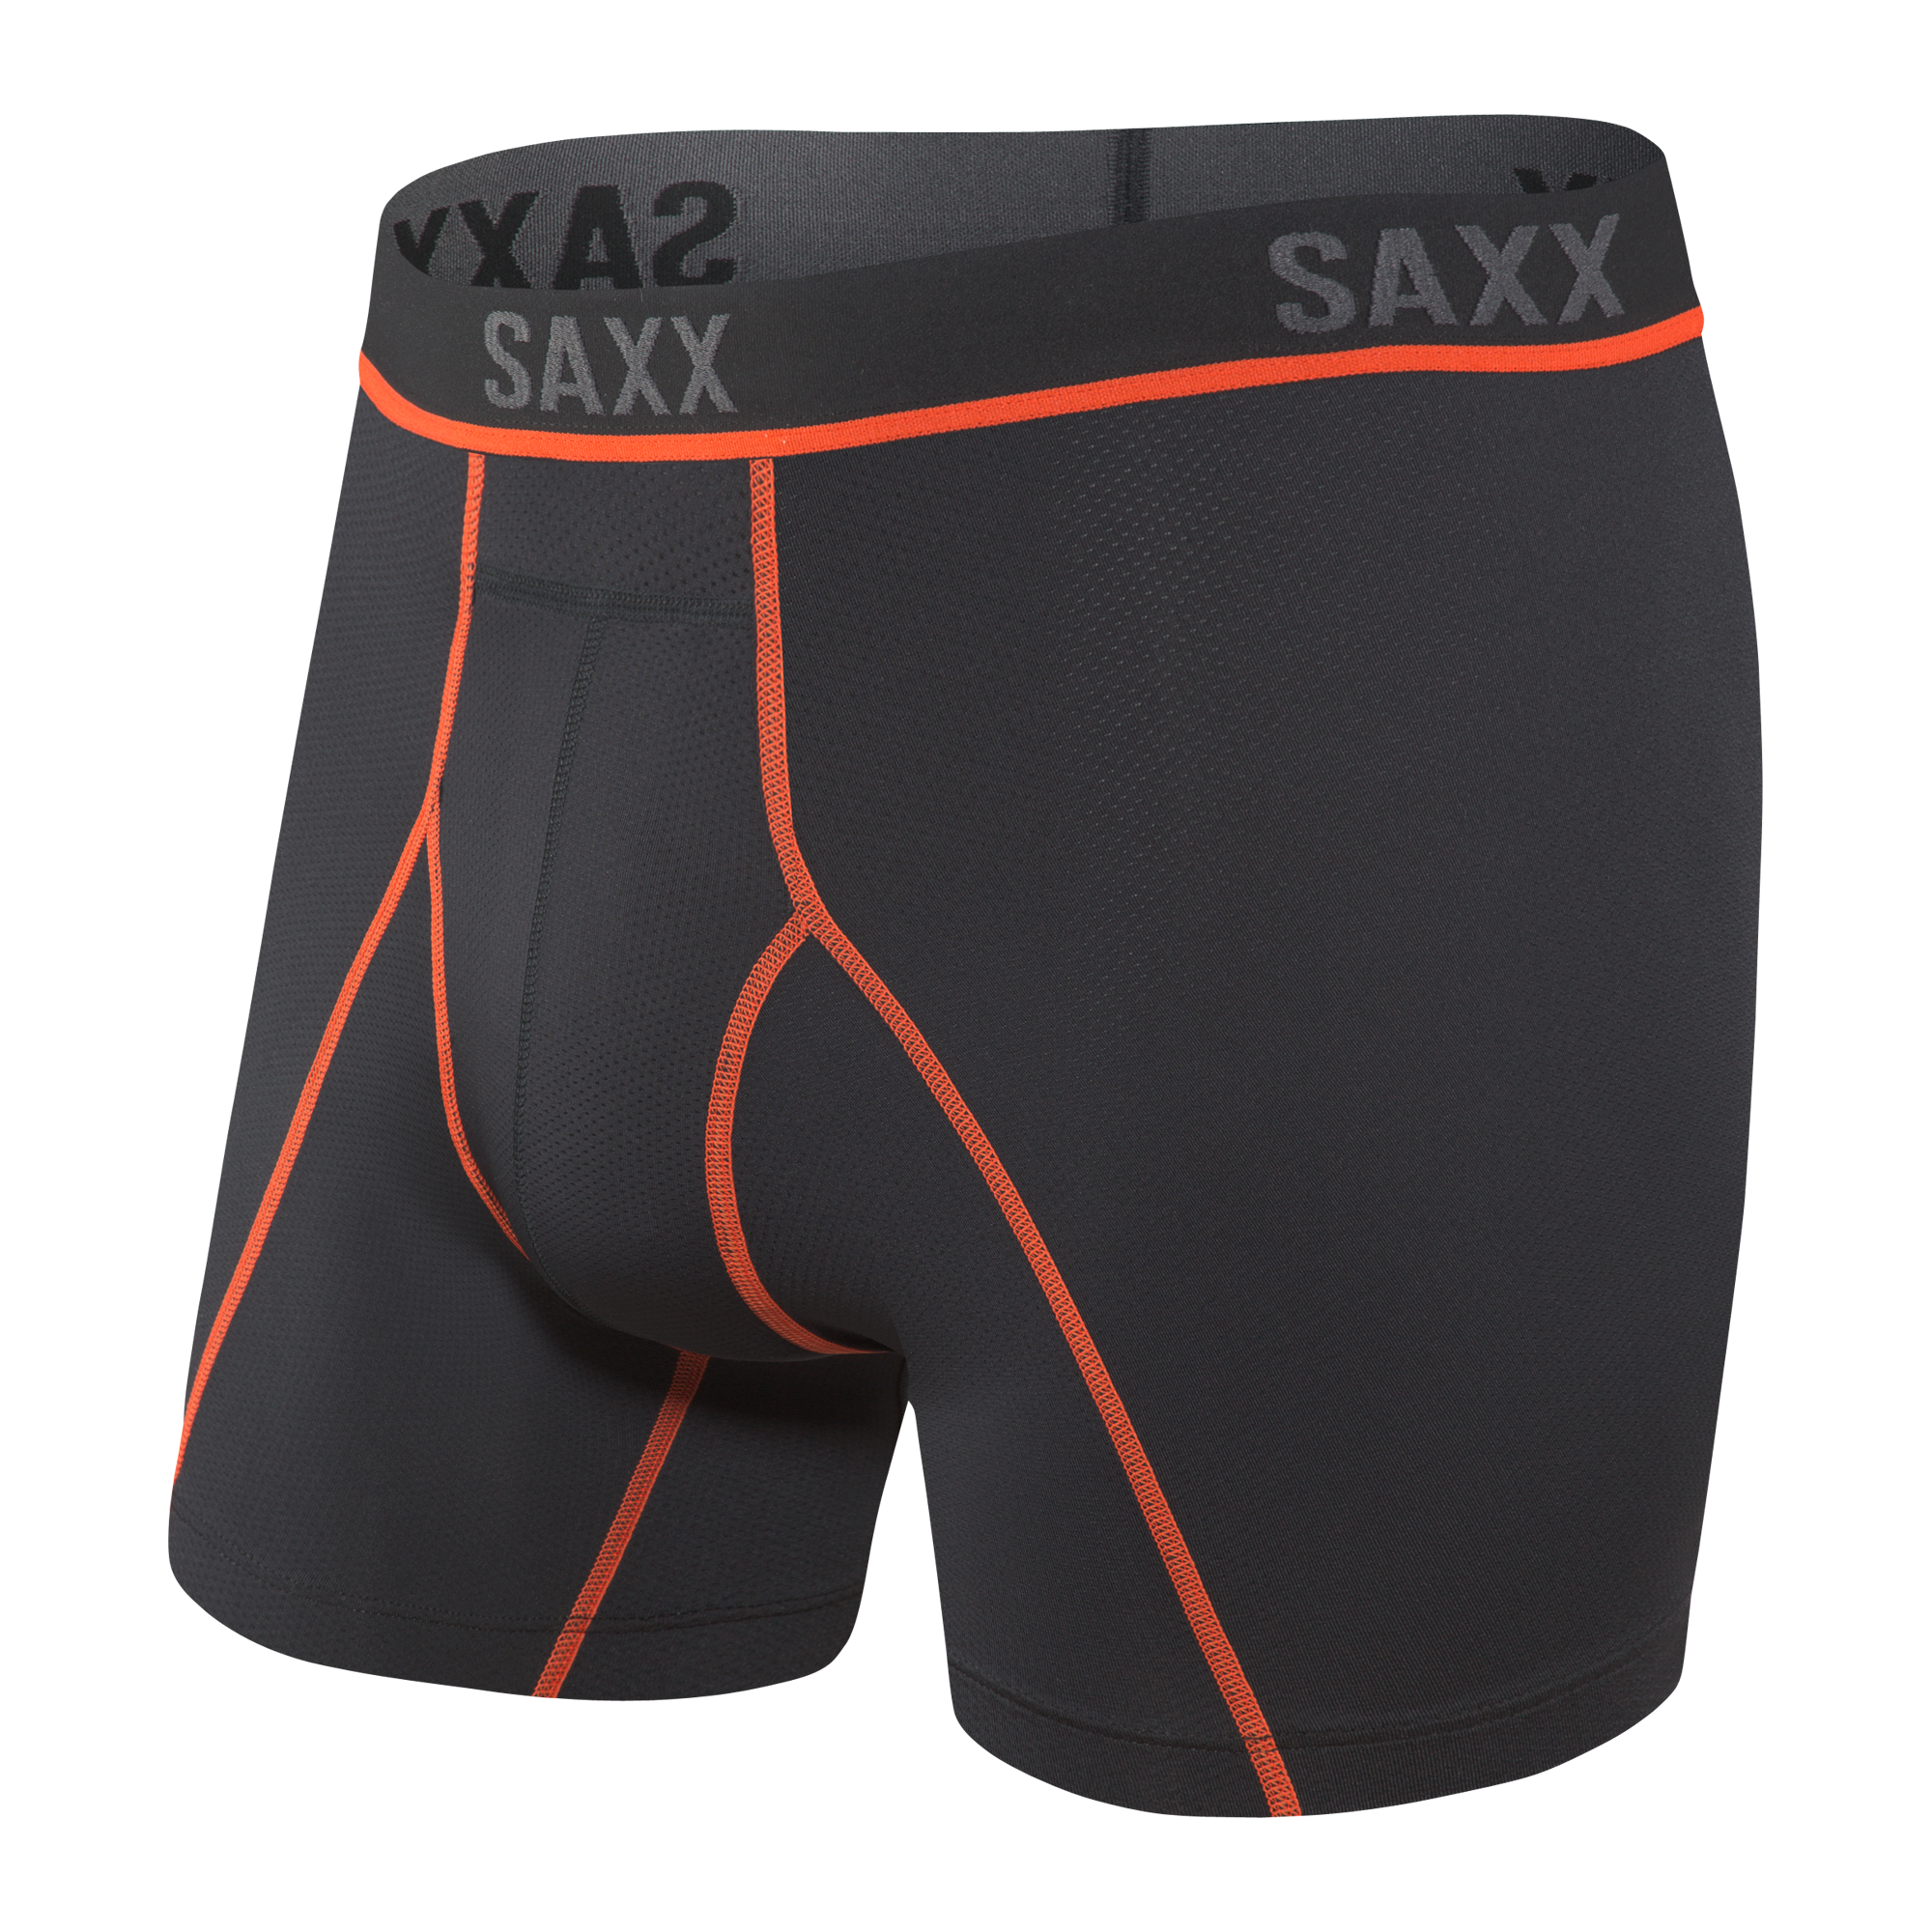 Front of Kinetic HD Boxer Brief in Black/Vermillion